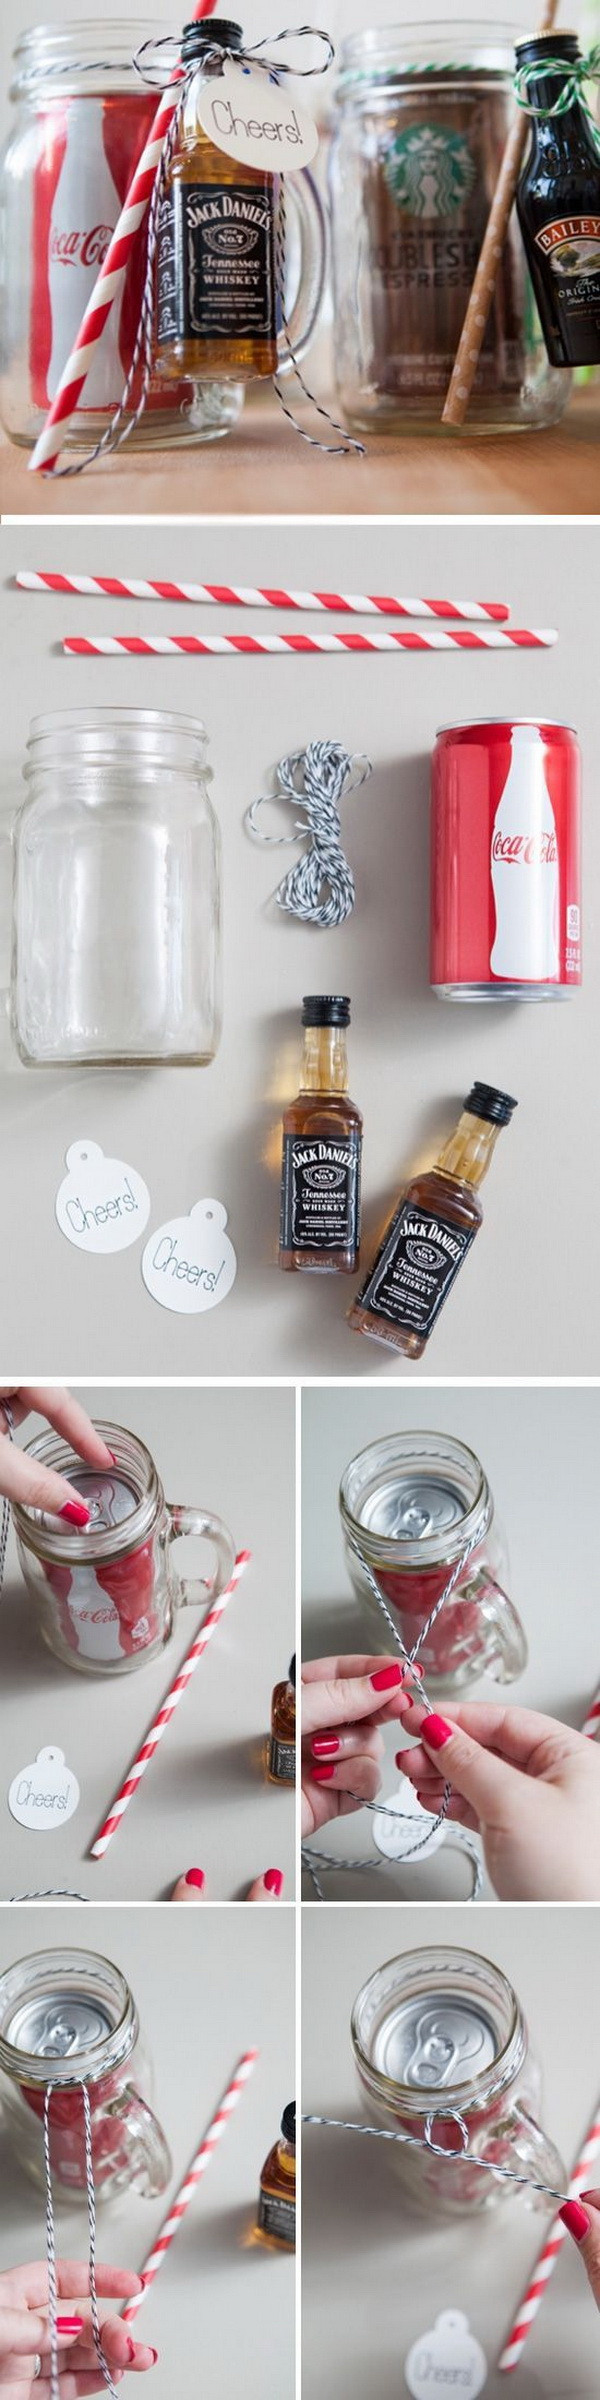 Valentine Gift Ideas For Daddy
 25 Great DIY Gift Ideas for Dad This Holiday For